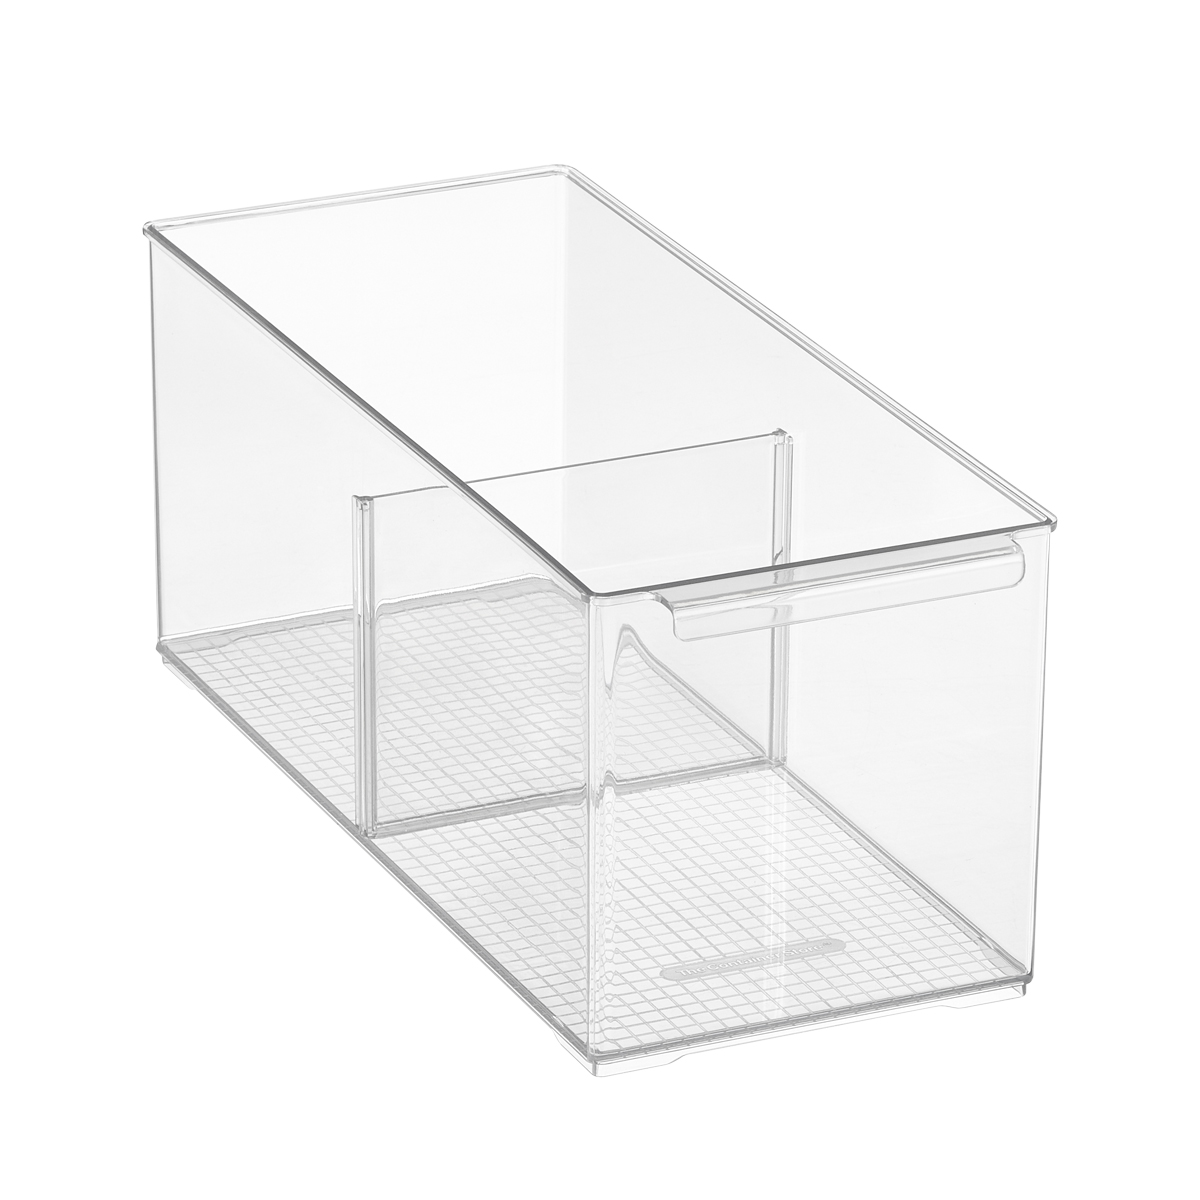 https://www.containerstore.com/catalogimages/439745/10087167_15_Inch_Modular_Pantry_Bin_.jpg